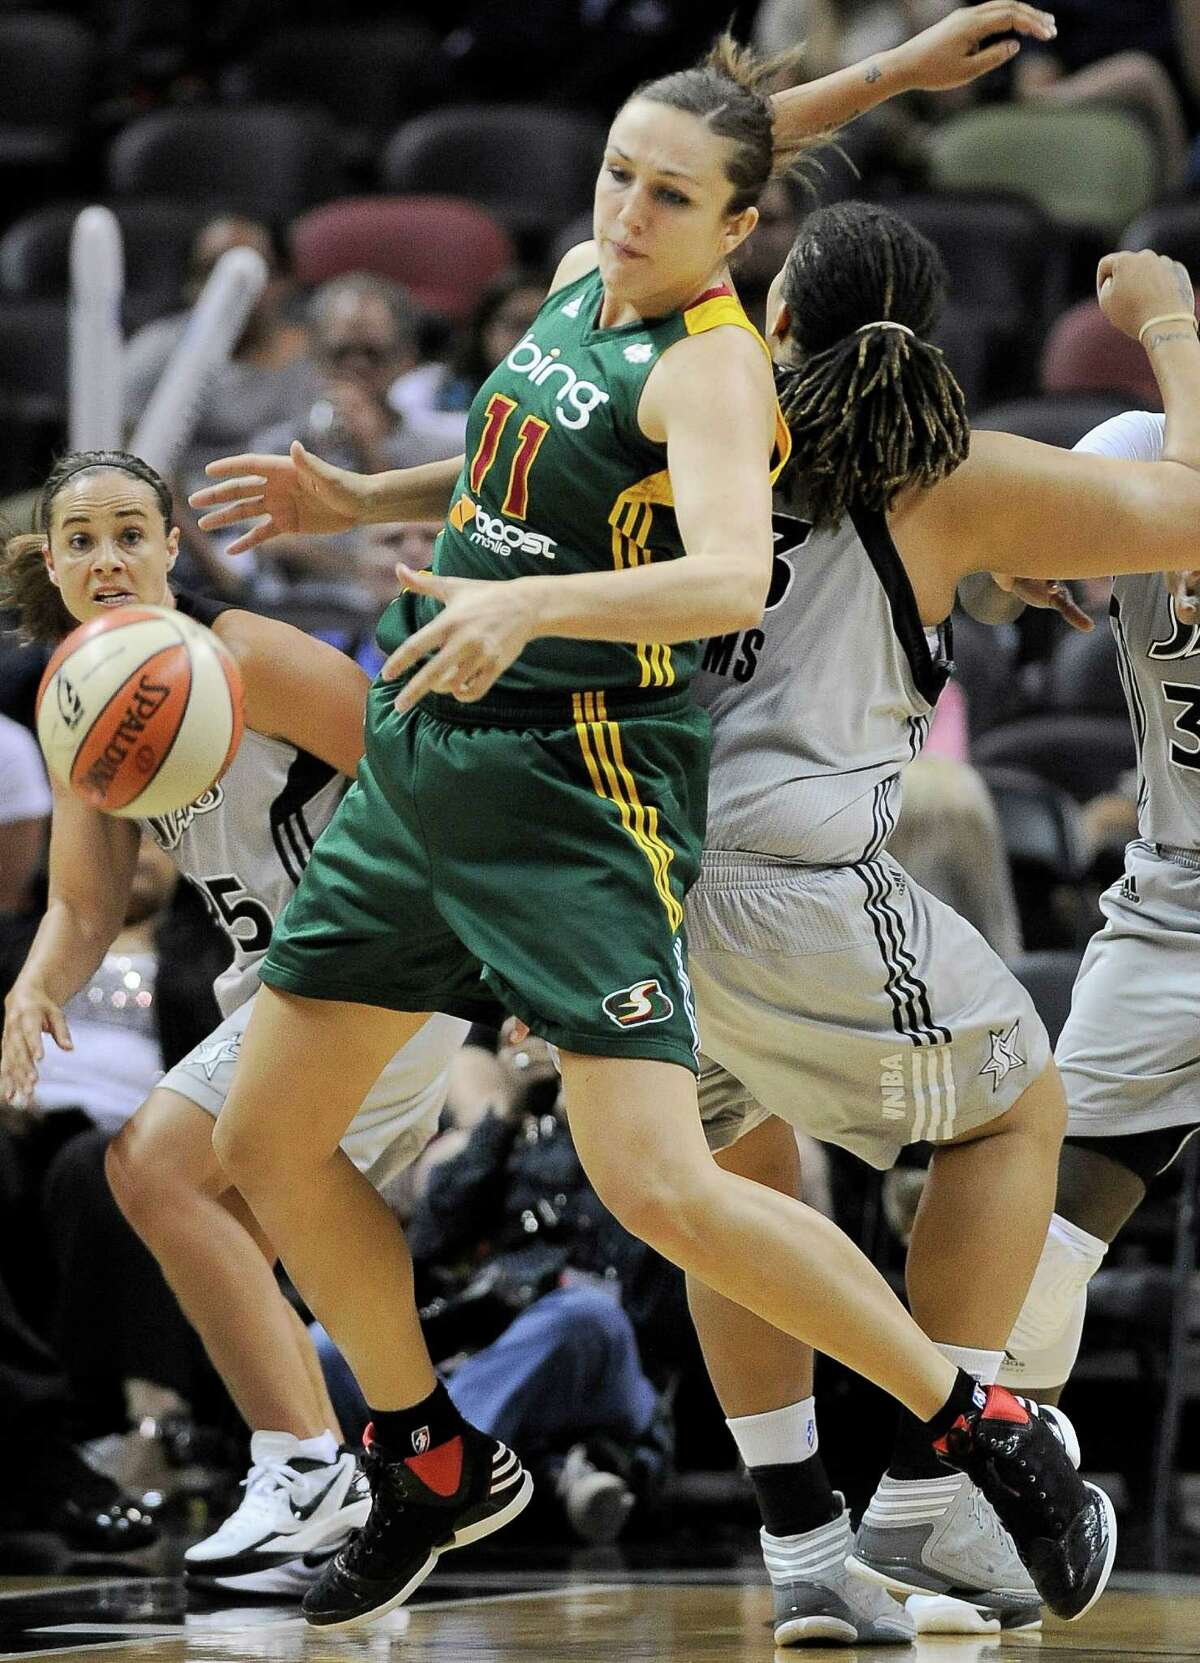 Seattle Storm's Ewelina Kobryn (11), of Poland, collides with San Antonio Silver Stars' Danielle Adams during the second half of a WNBA basketball game, Friday Sept. 14, 2012, in San Antonio. San Antonio won 90-66.